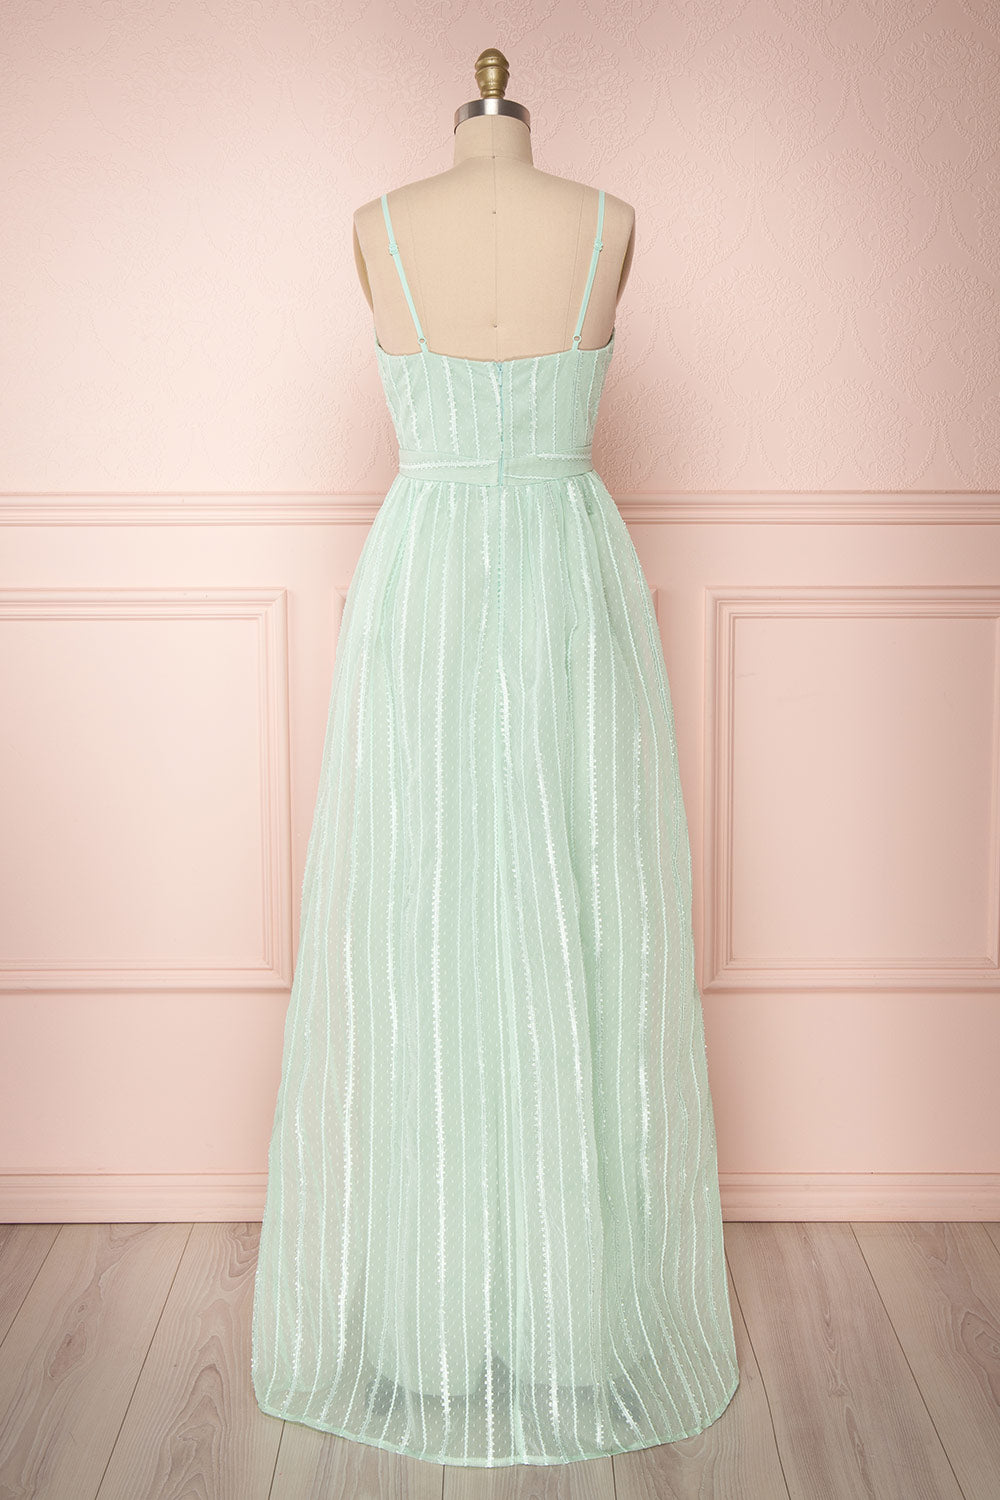 Aegis Lychee Pink Striped Mesh A-Line Gown | Boutique 1861 5